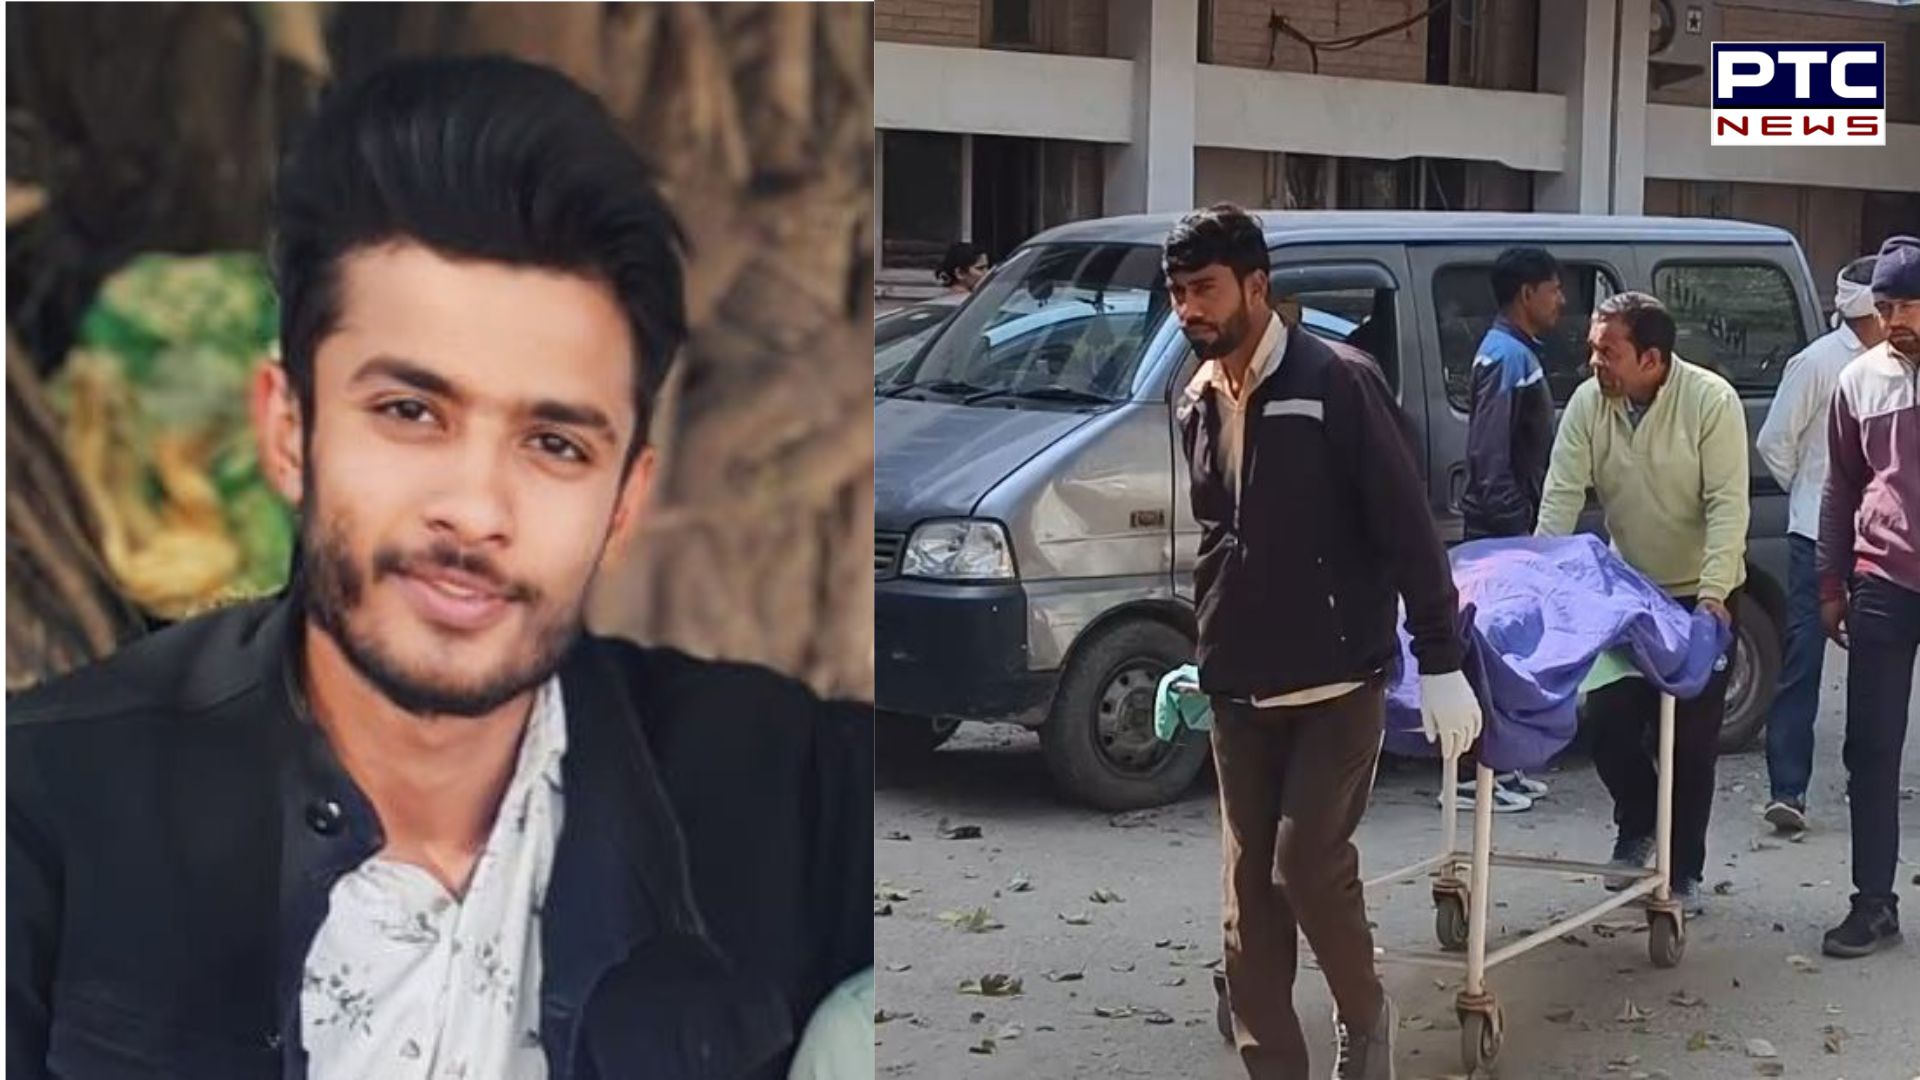 Internet search ends in tragedy: Fatal accident claims student's life, injures 3 others in Hisar